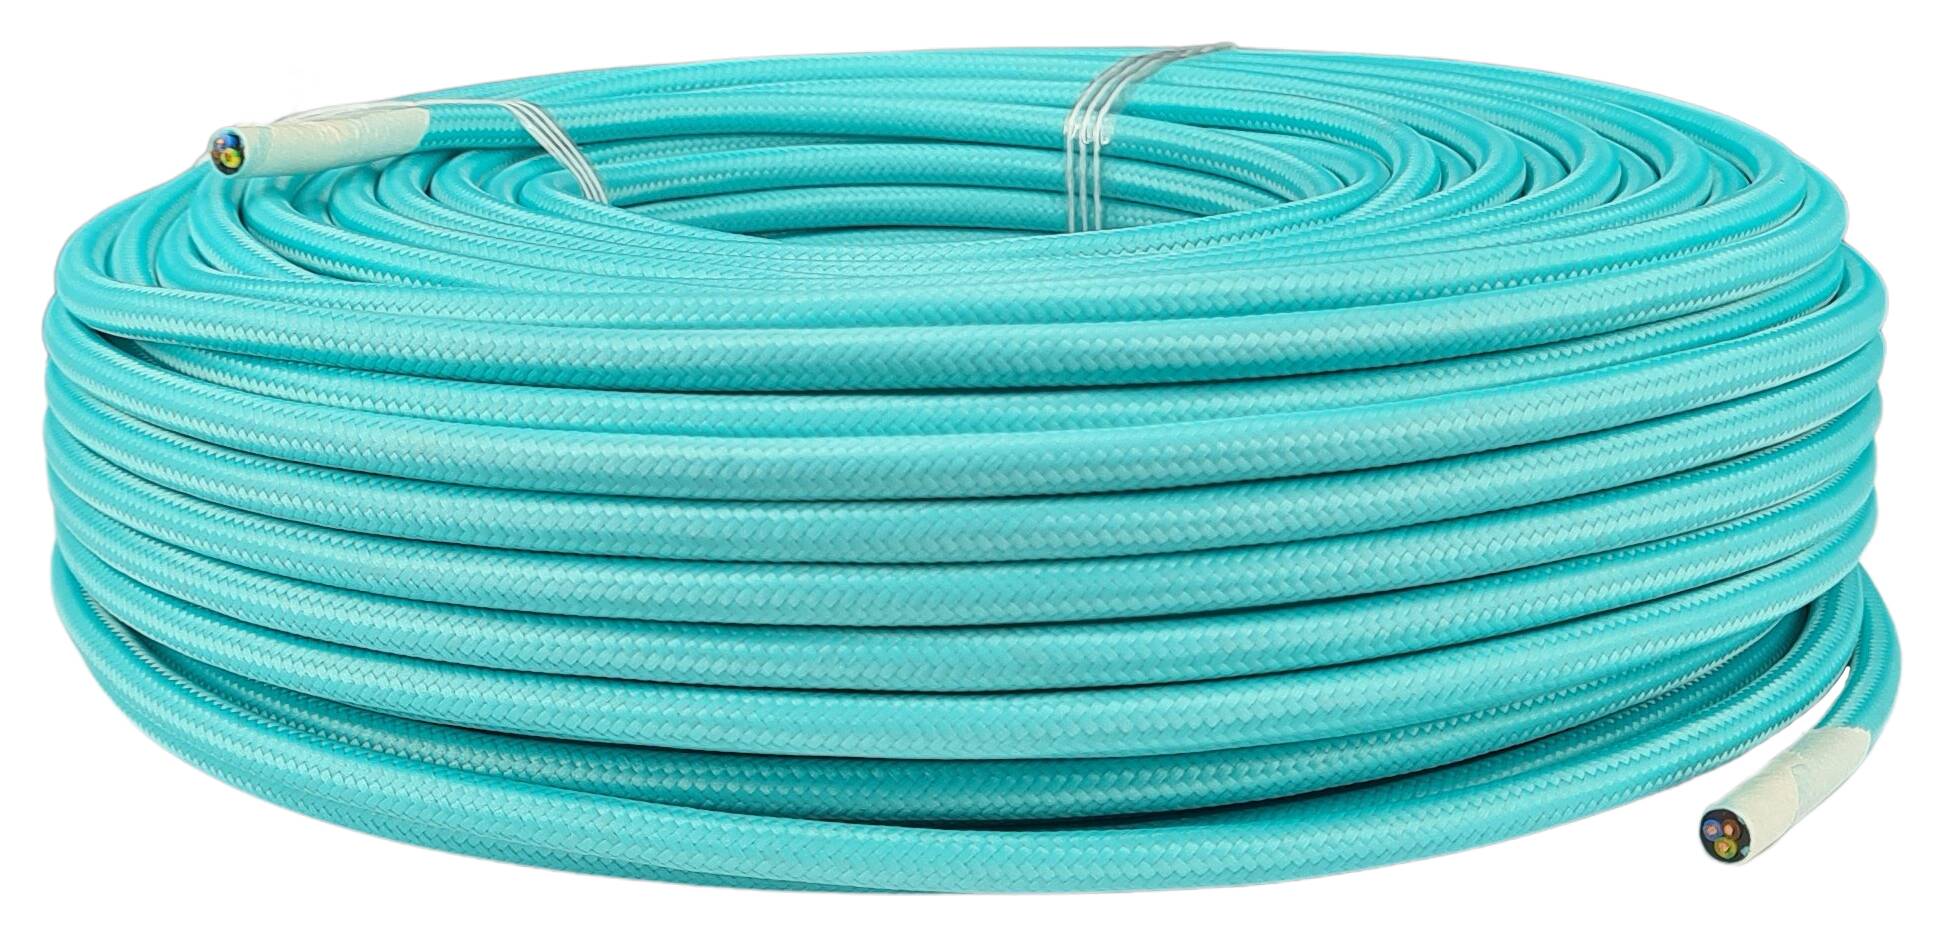 cable 3x 0,75 H03VV-F textile braided RAL 6034 turquoise green